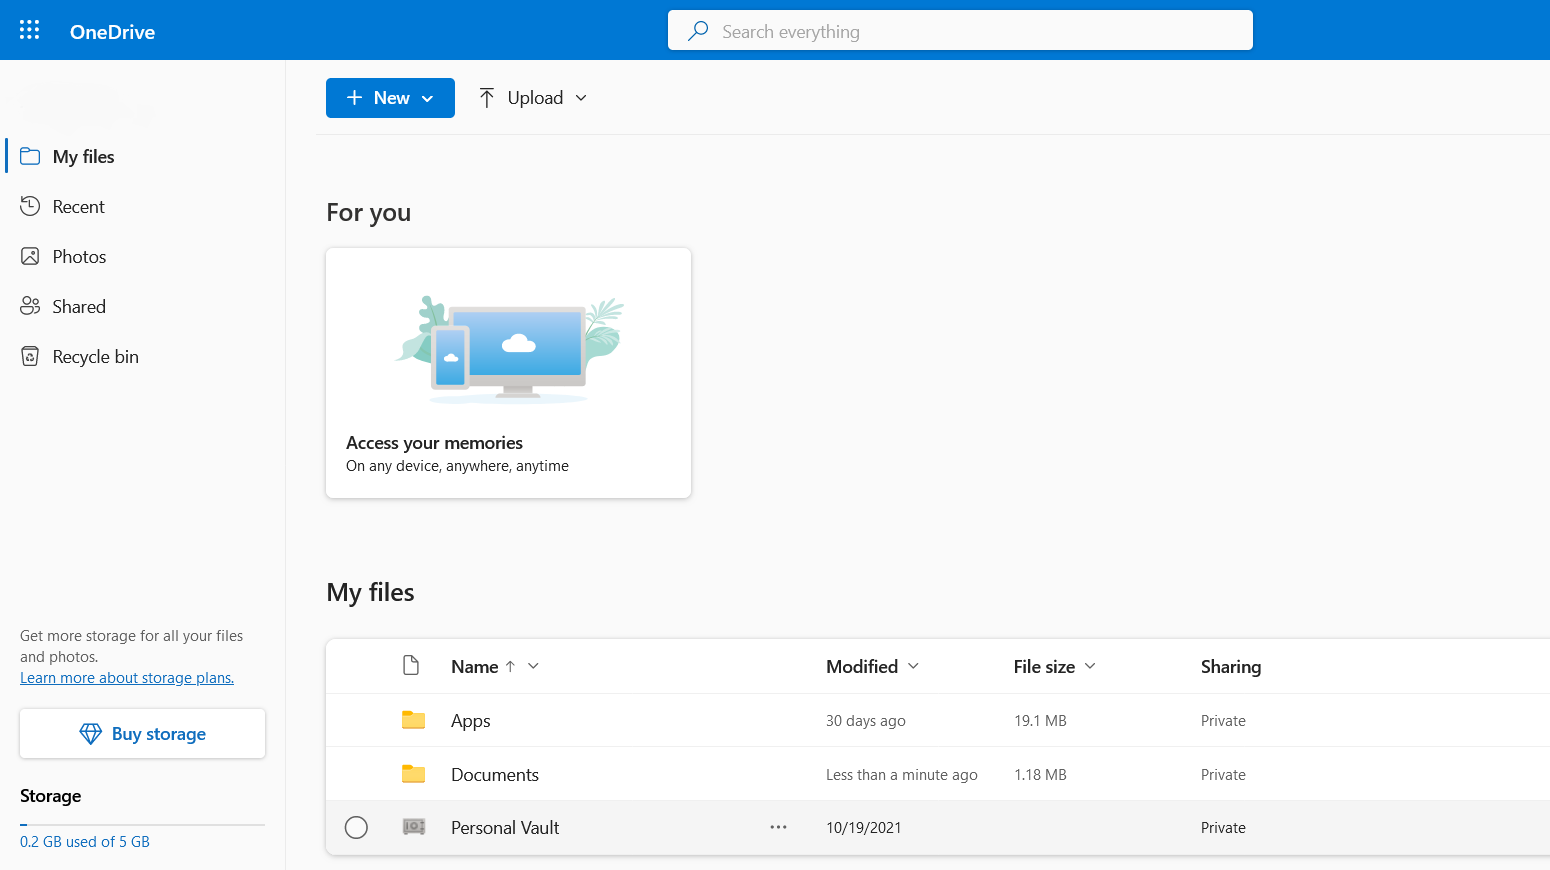 OneDrive is a secure place for storing Microsoft Office files and personal documents